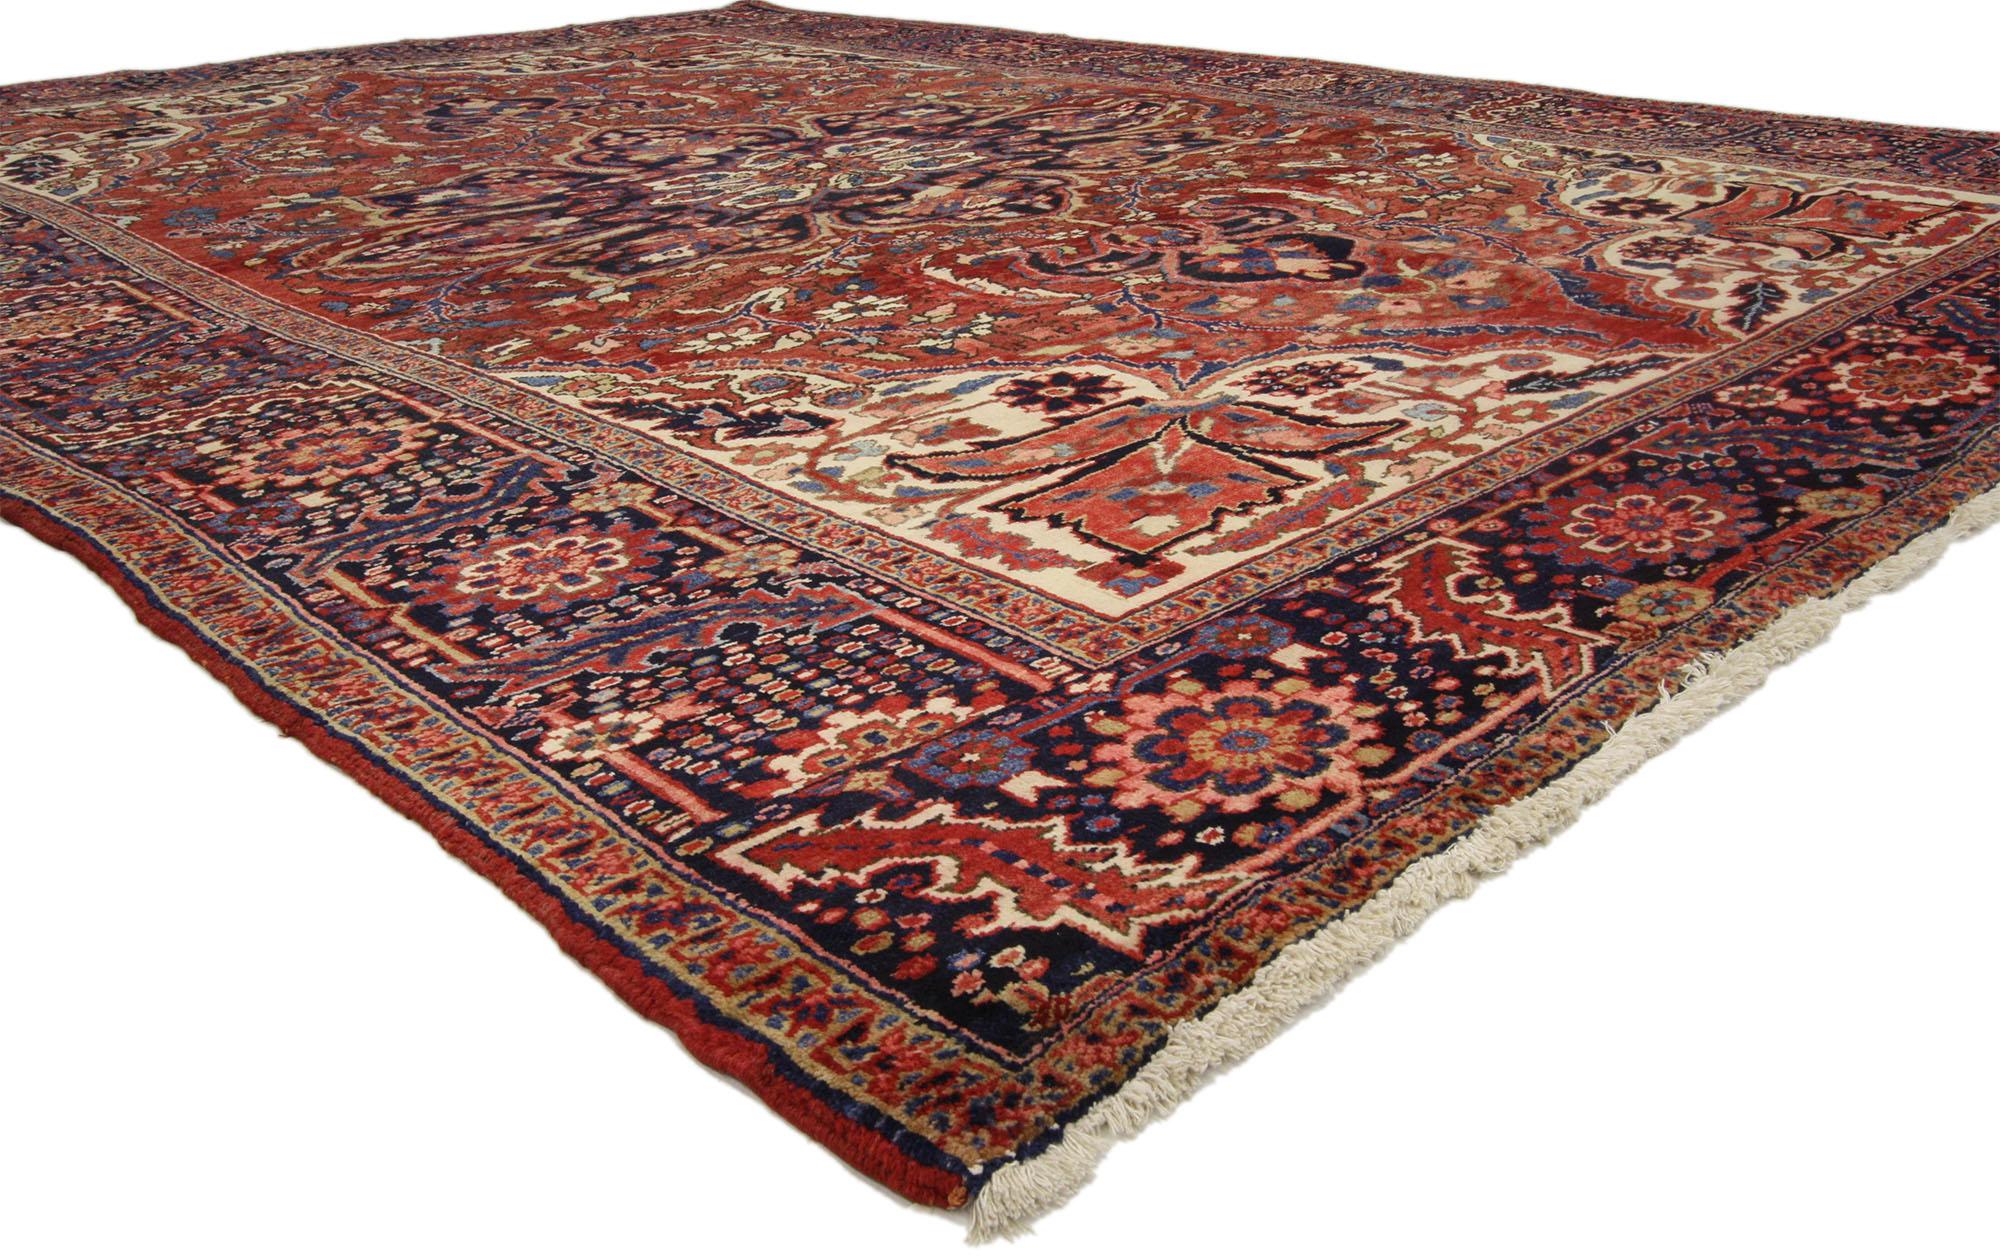 76183 vintage Persian Heriz rug with traditional English Tudor Manor House style.
 Full of character and stately presence, this vintage Persian Heriz rug features classical elements of Persian rug design and modern style. This vintage Heriz rug has